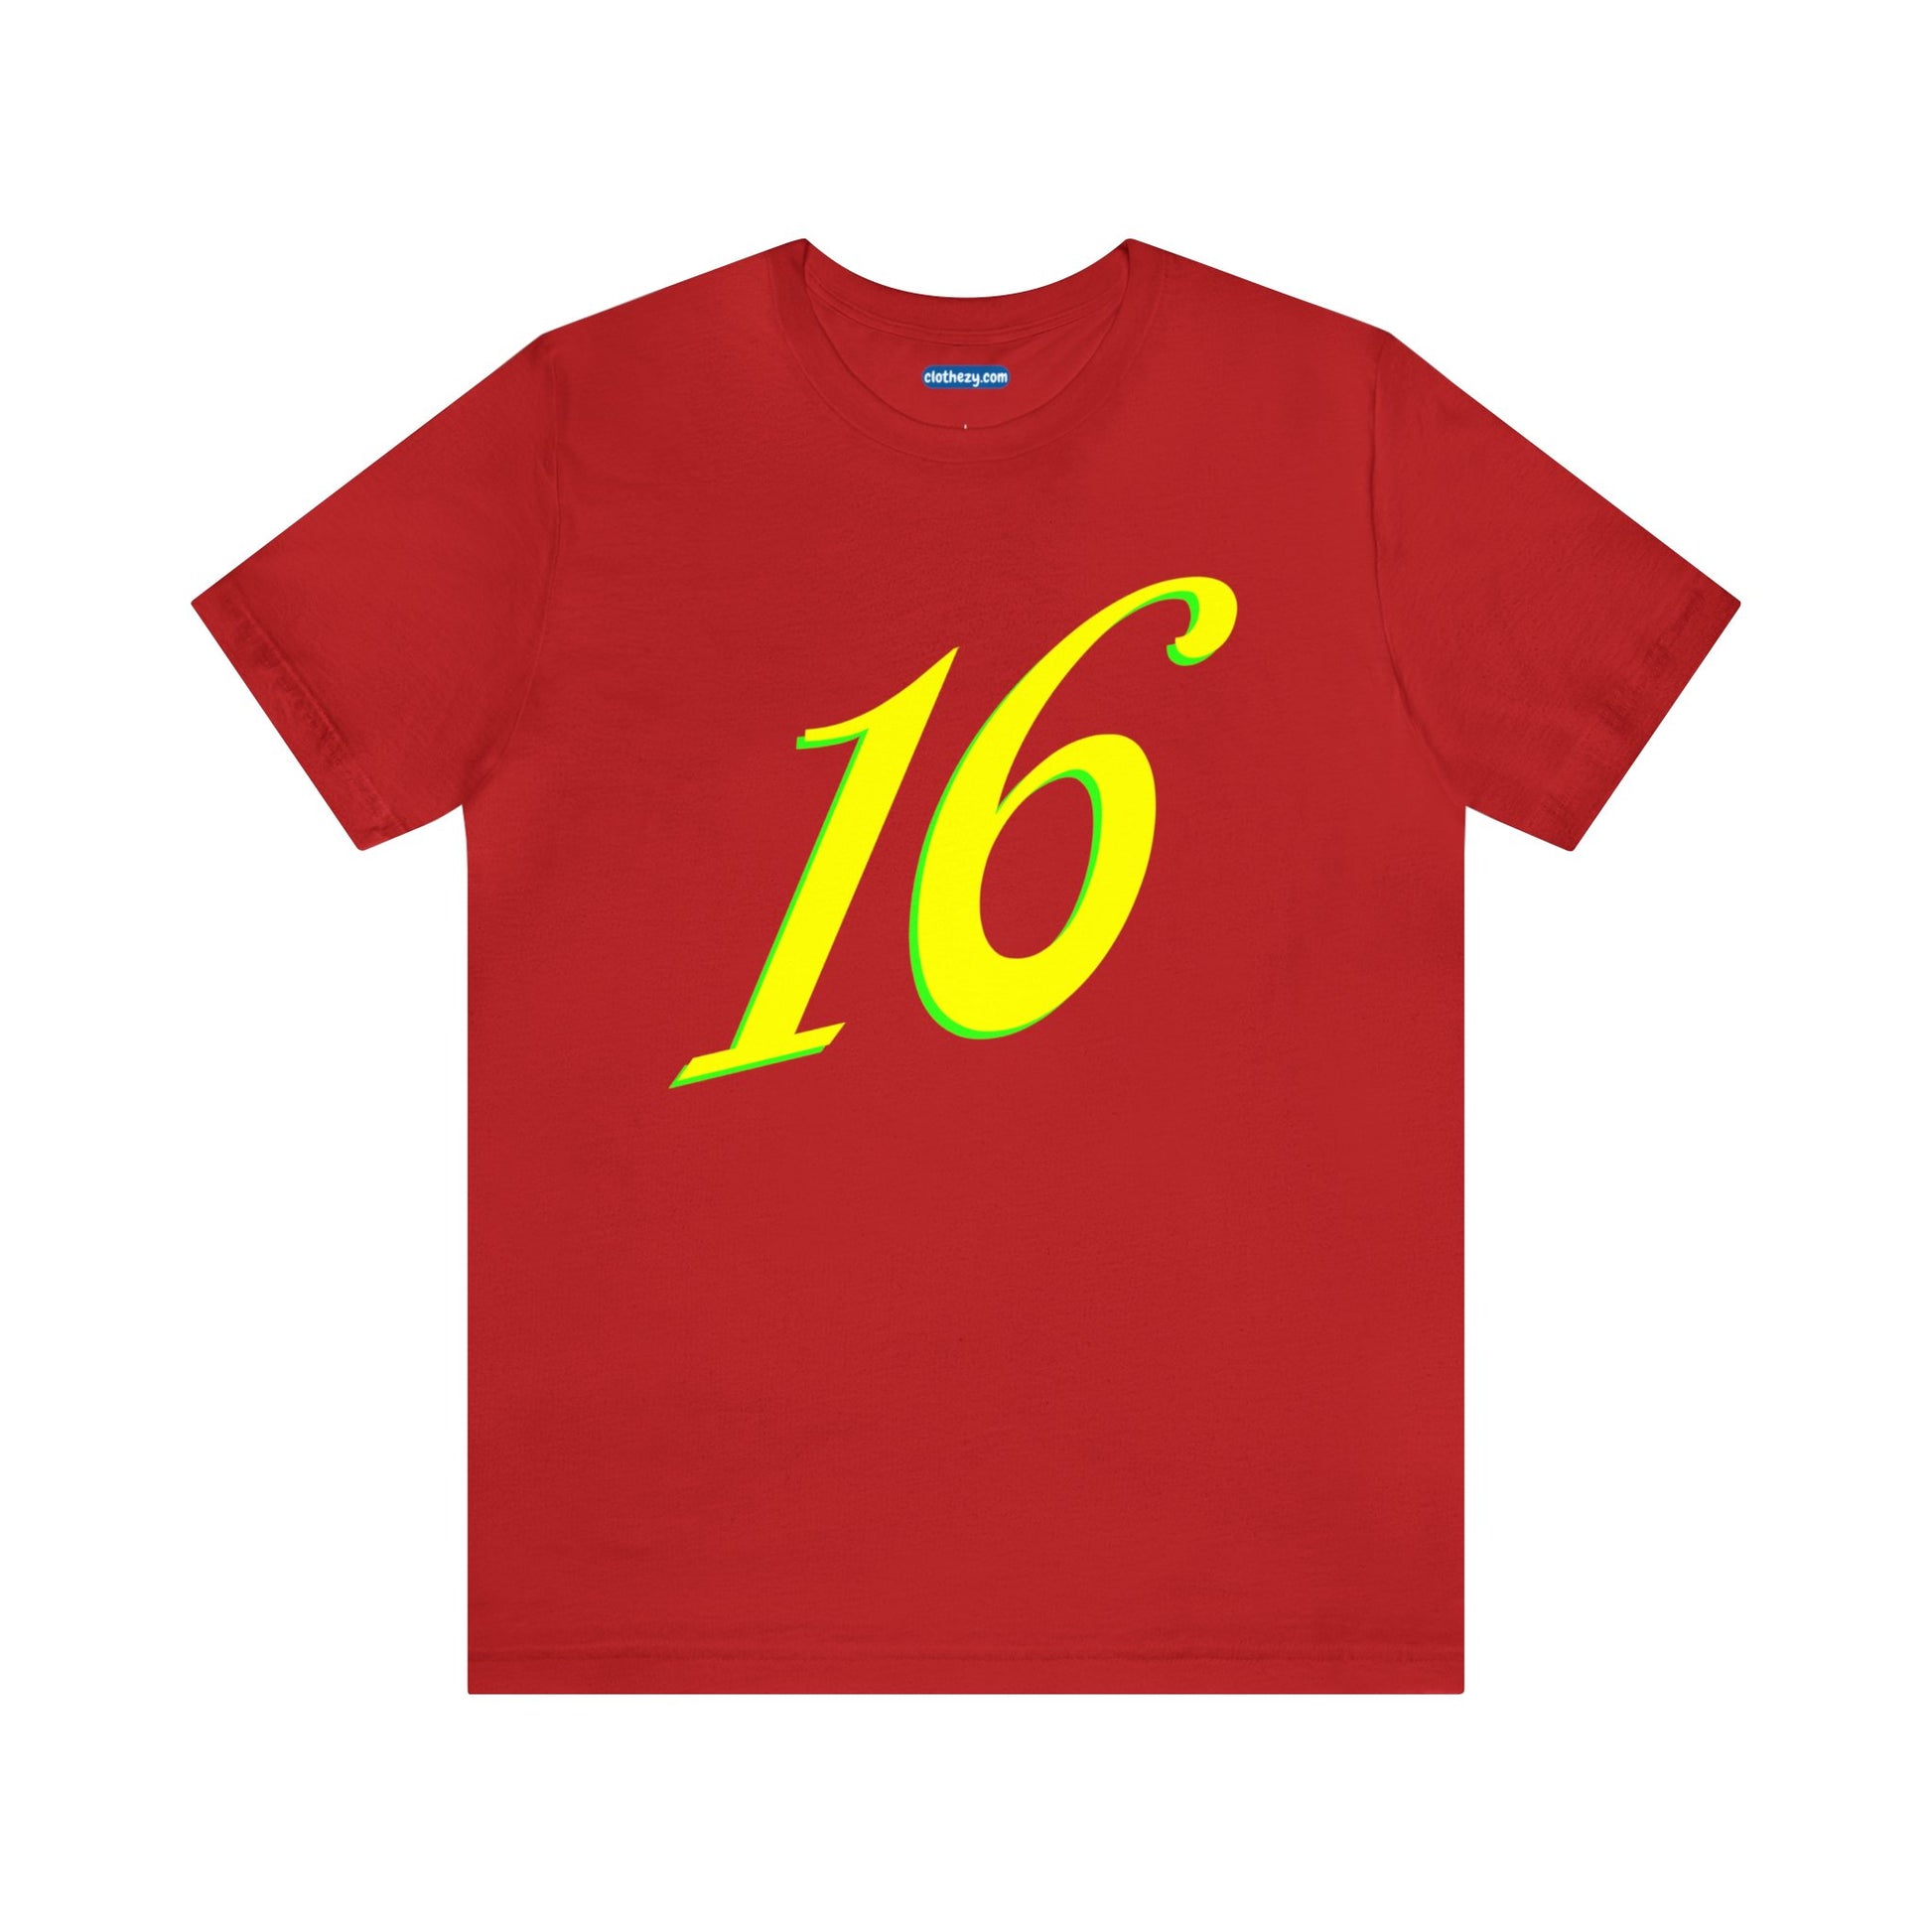 Number 16 Design - Soft Cotton Tee for birthdays and celebrations, Gift for friends and family, Multiple Options by clothezy.com in Red Size Small - Buy Now